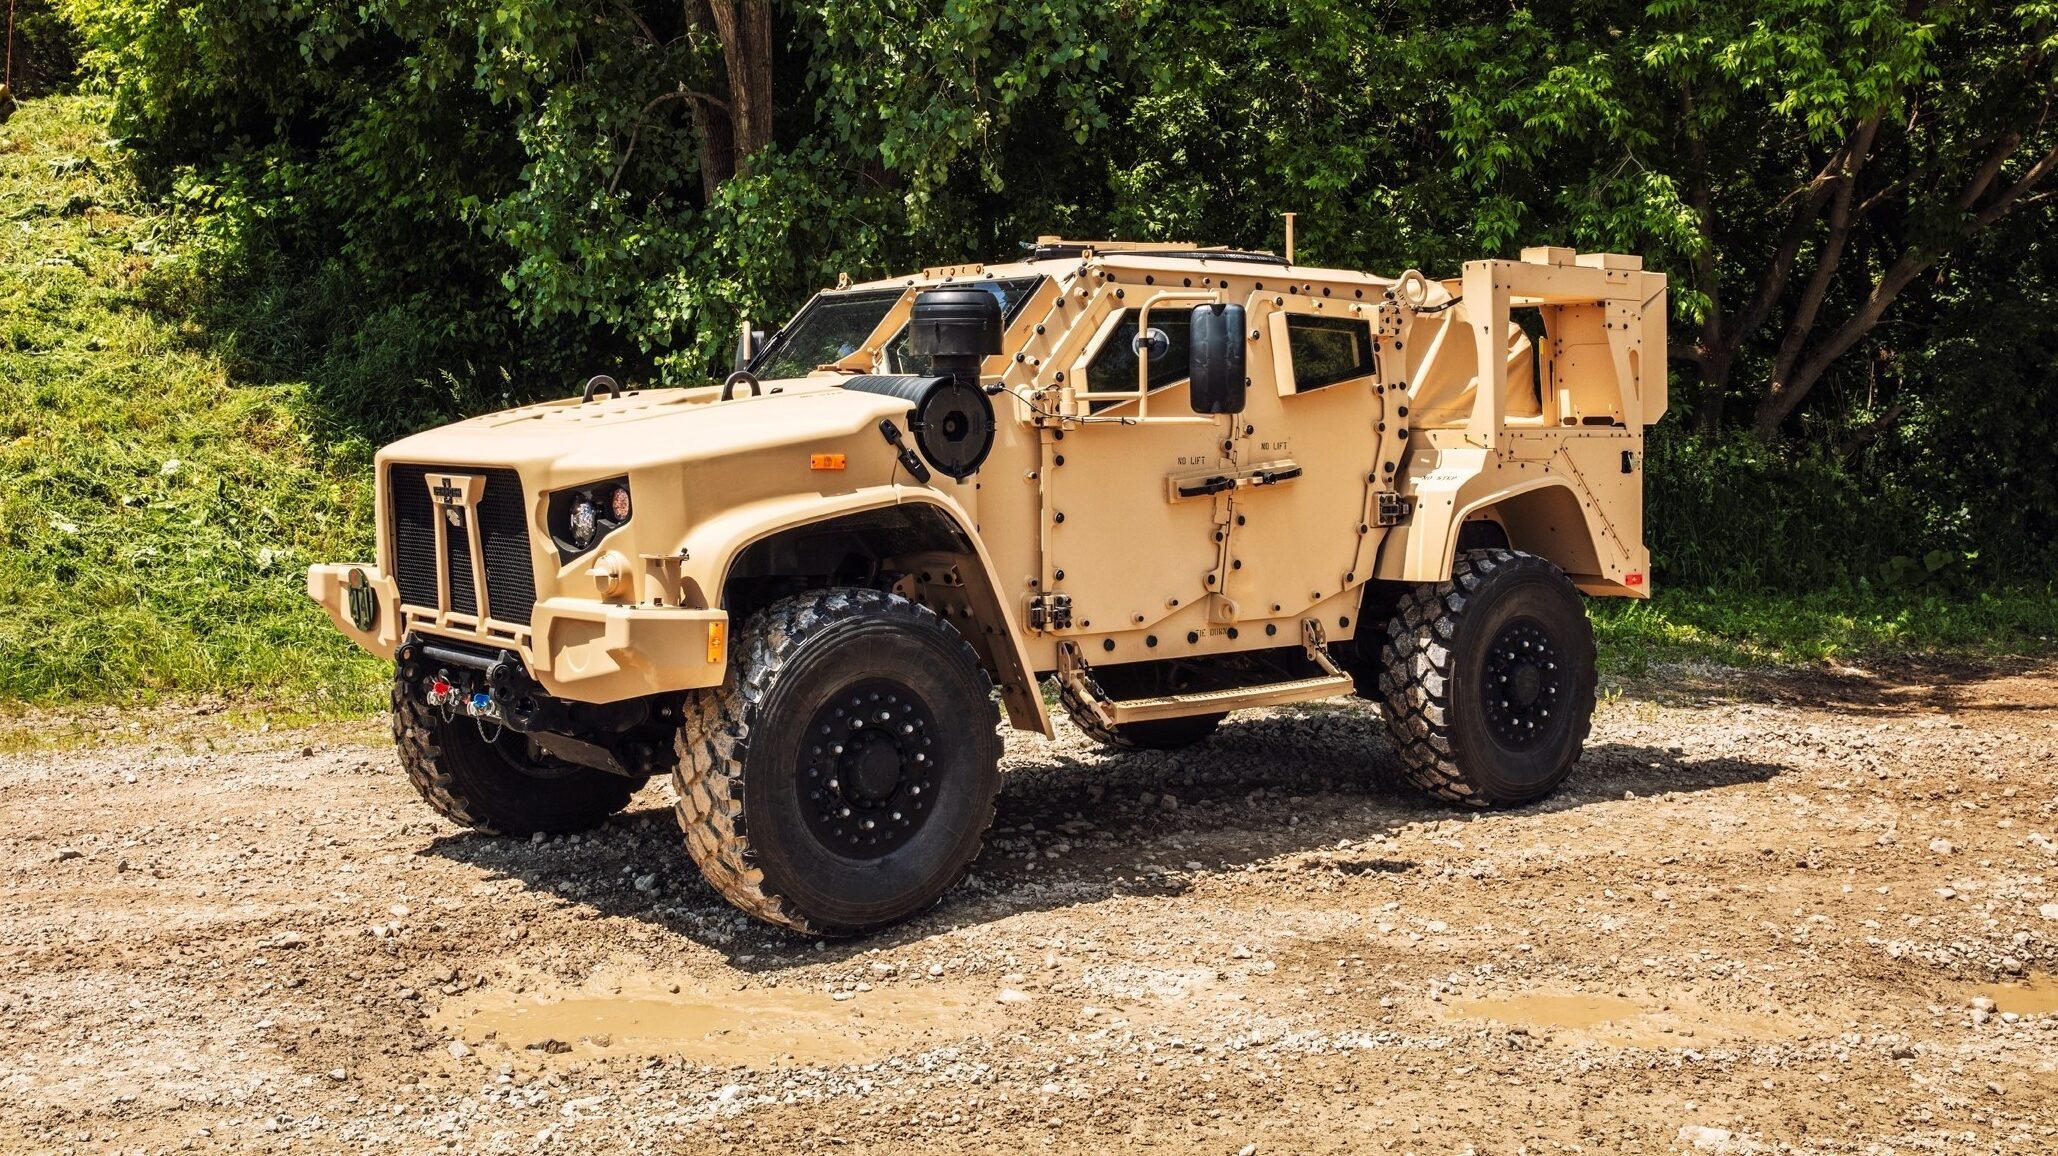 AM General wins Army’s JLTV recompete, deal valued up to $8.6 billion